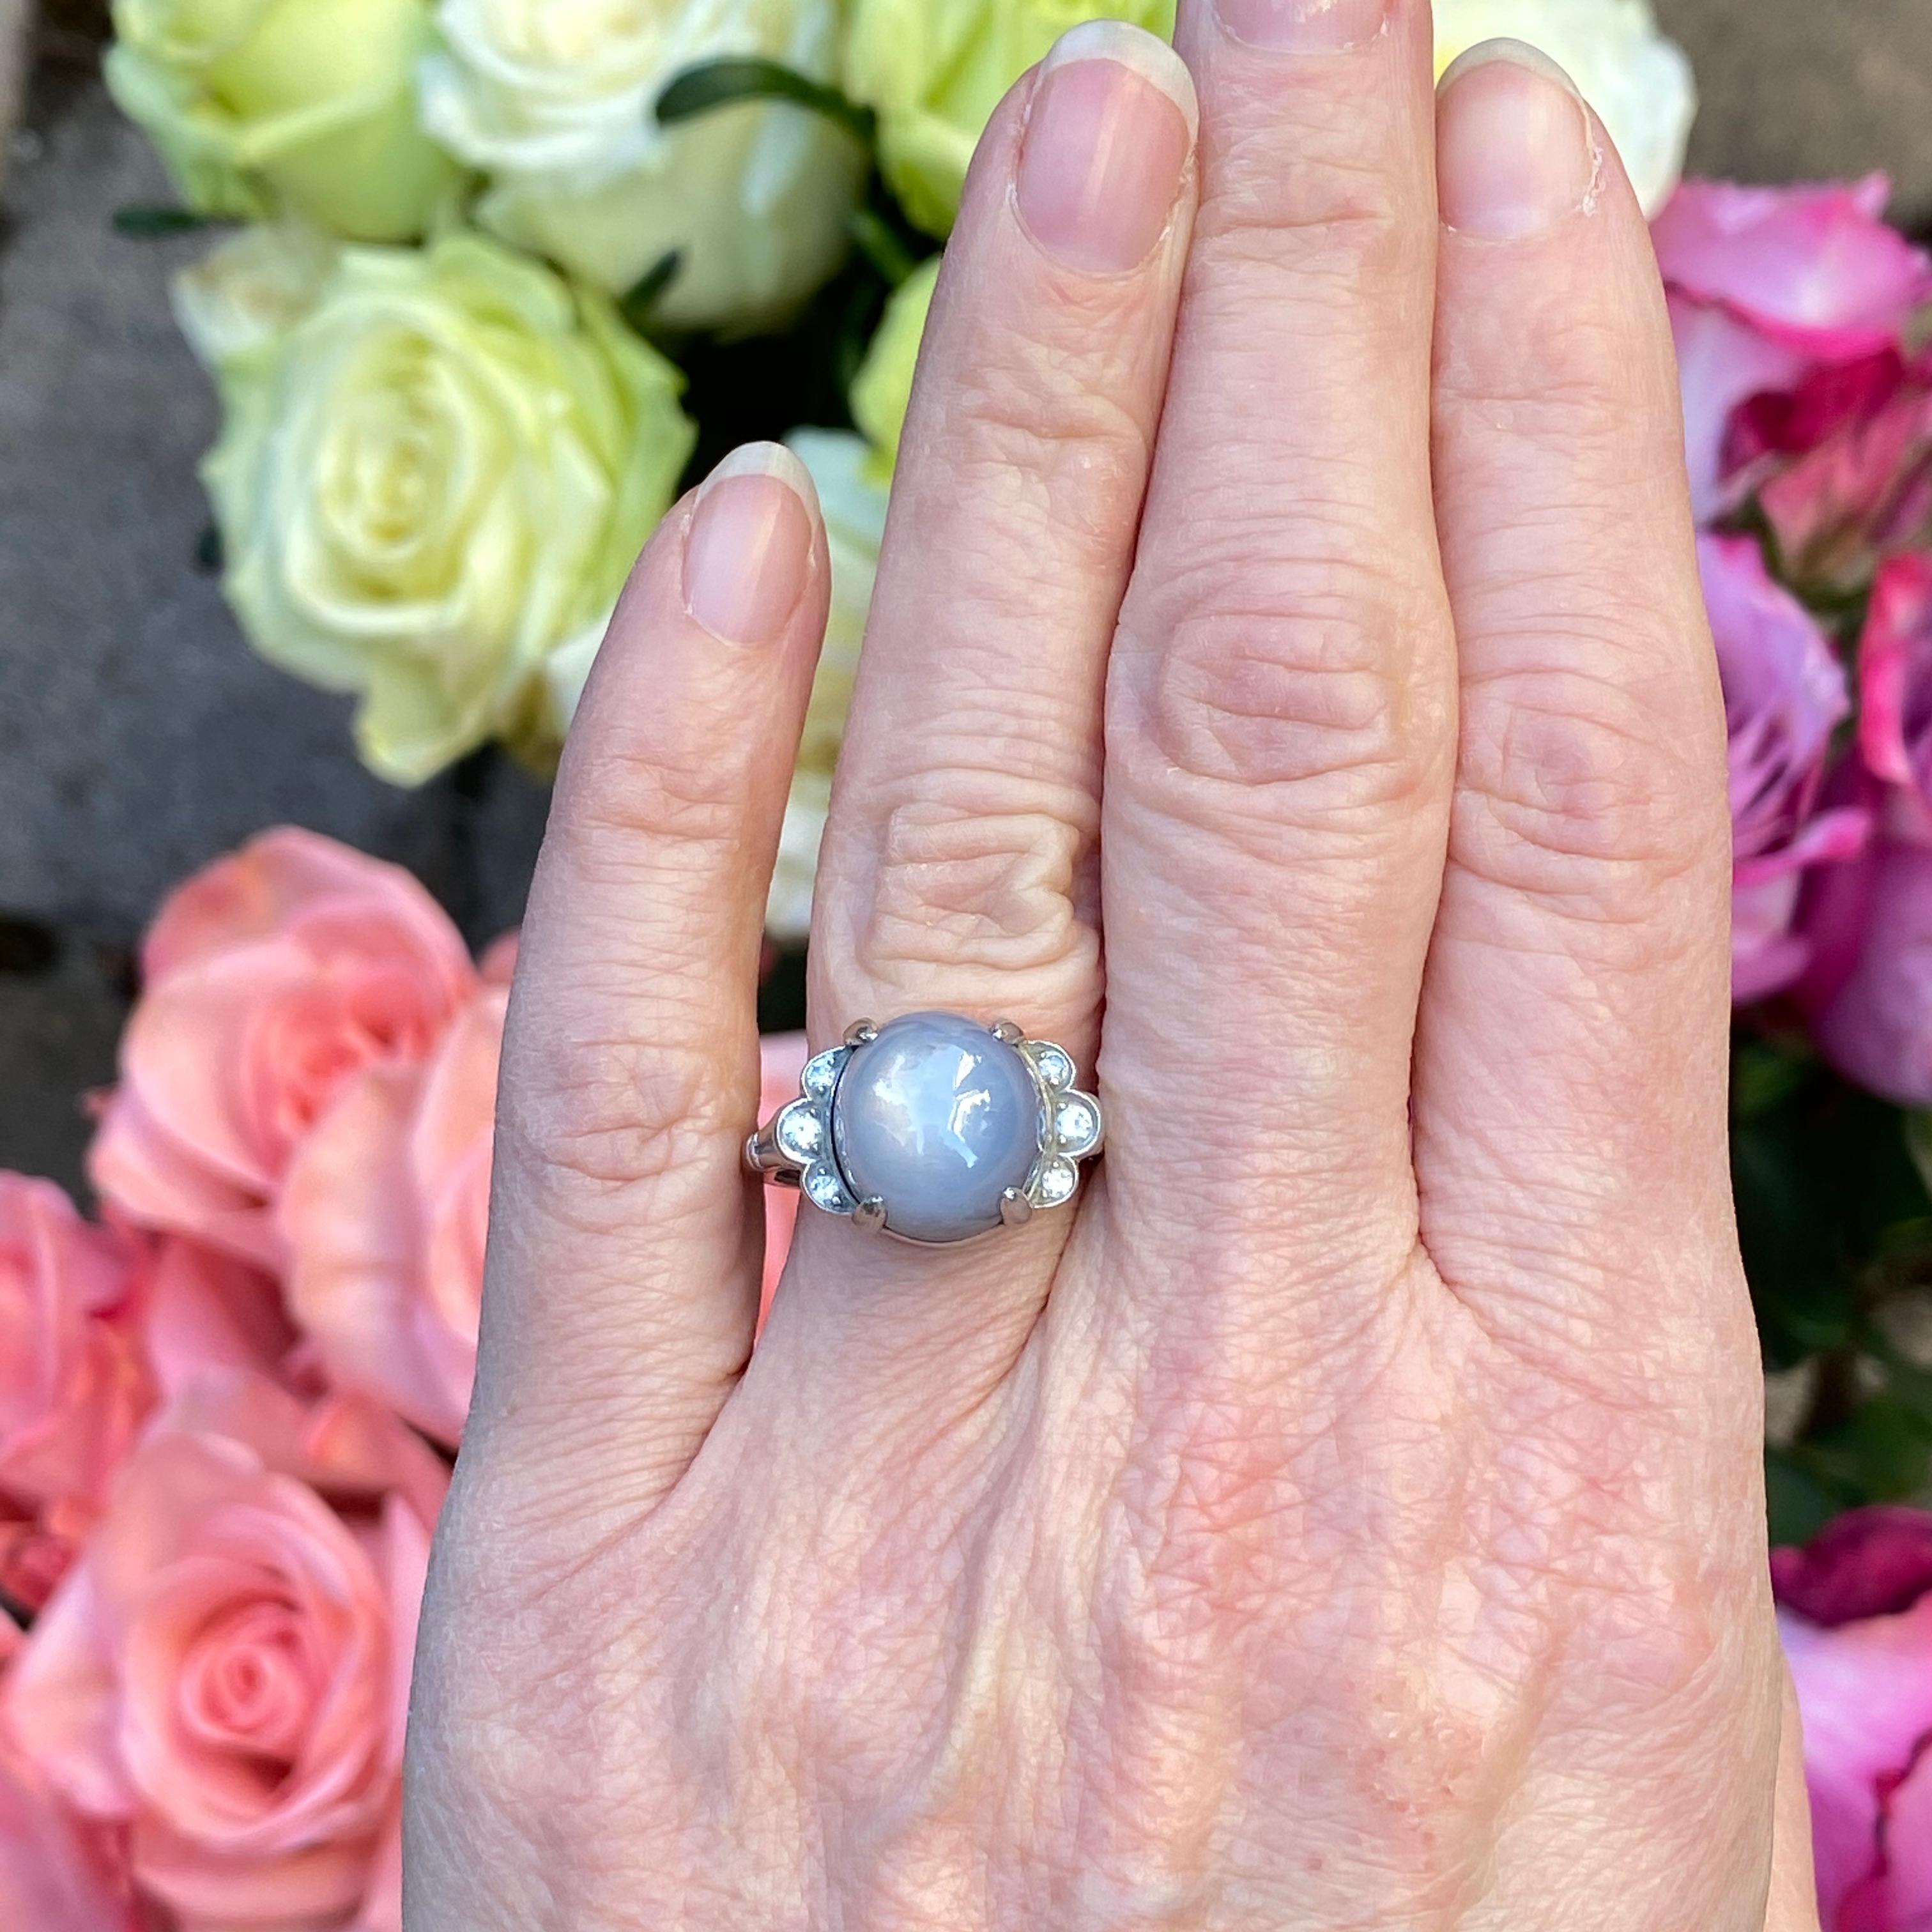 Details:
This fabulous ring is a show stopper! The star sapphire is a beautiful misty blue grey color with a fabulous glow. This ring is from Granat Bros, and is stamped on the inside of the band. This ring comes with an appraisal, and appraised for